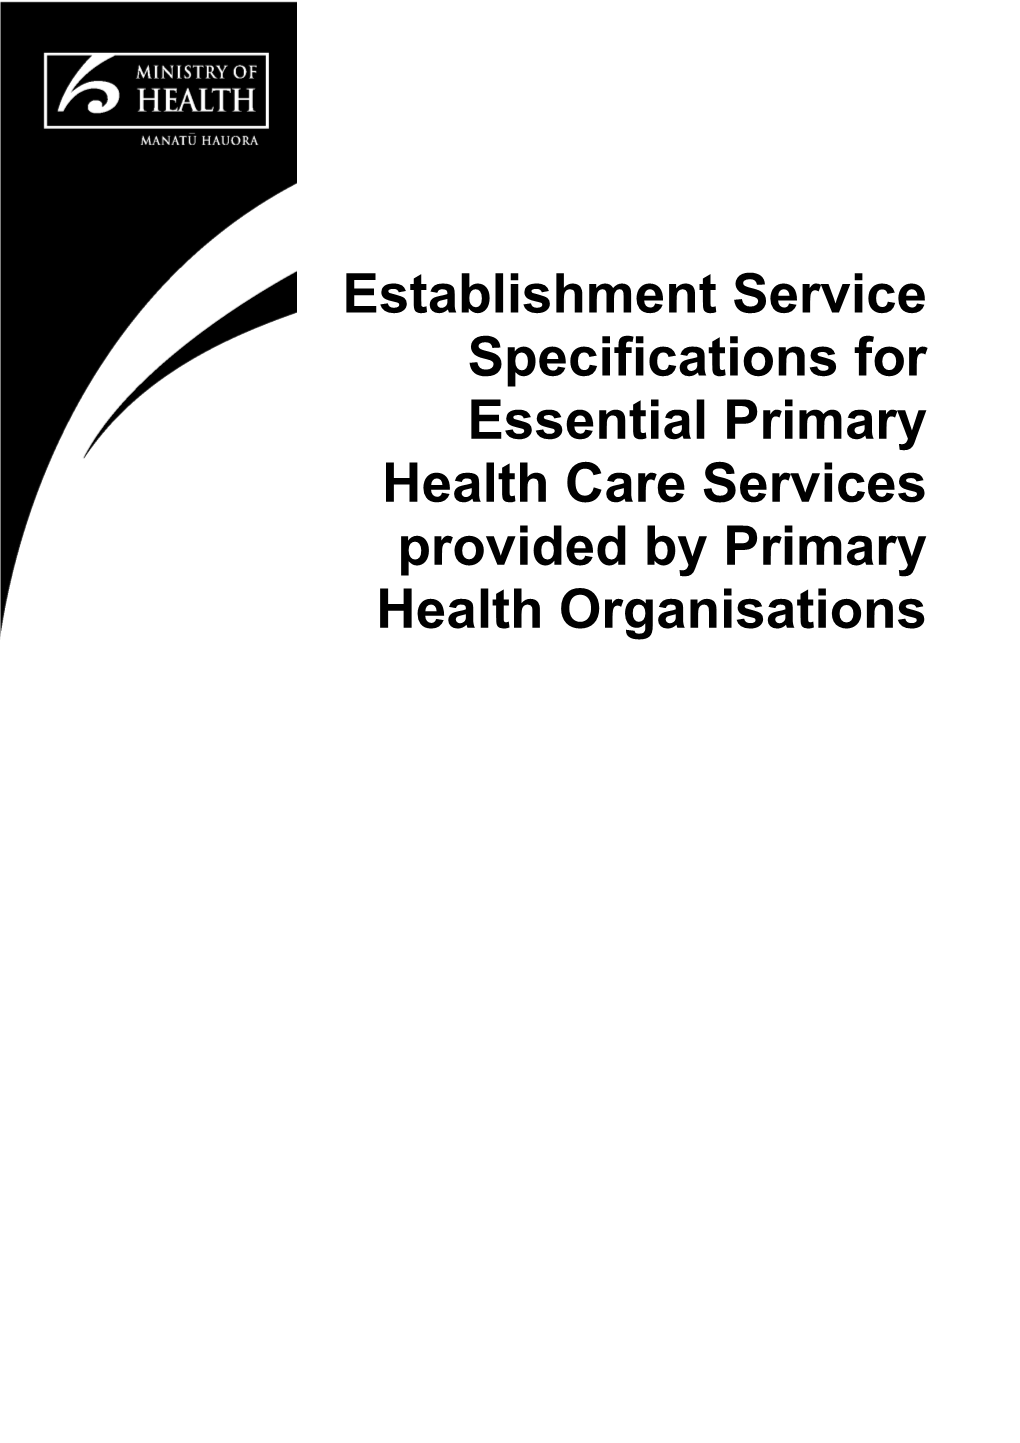 Establishment Service Specifications for Essential Primary Health Care Services Provided